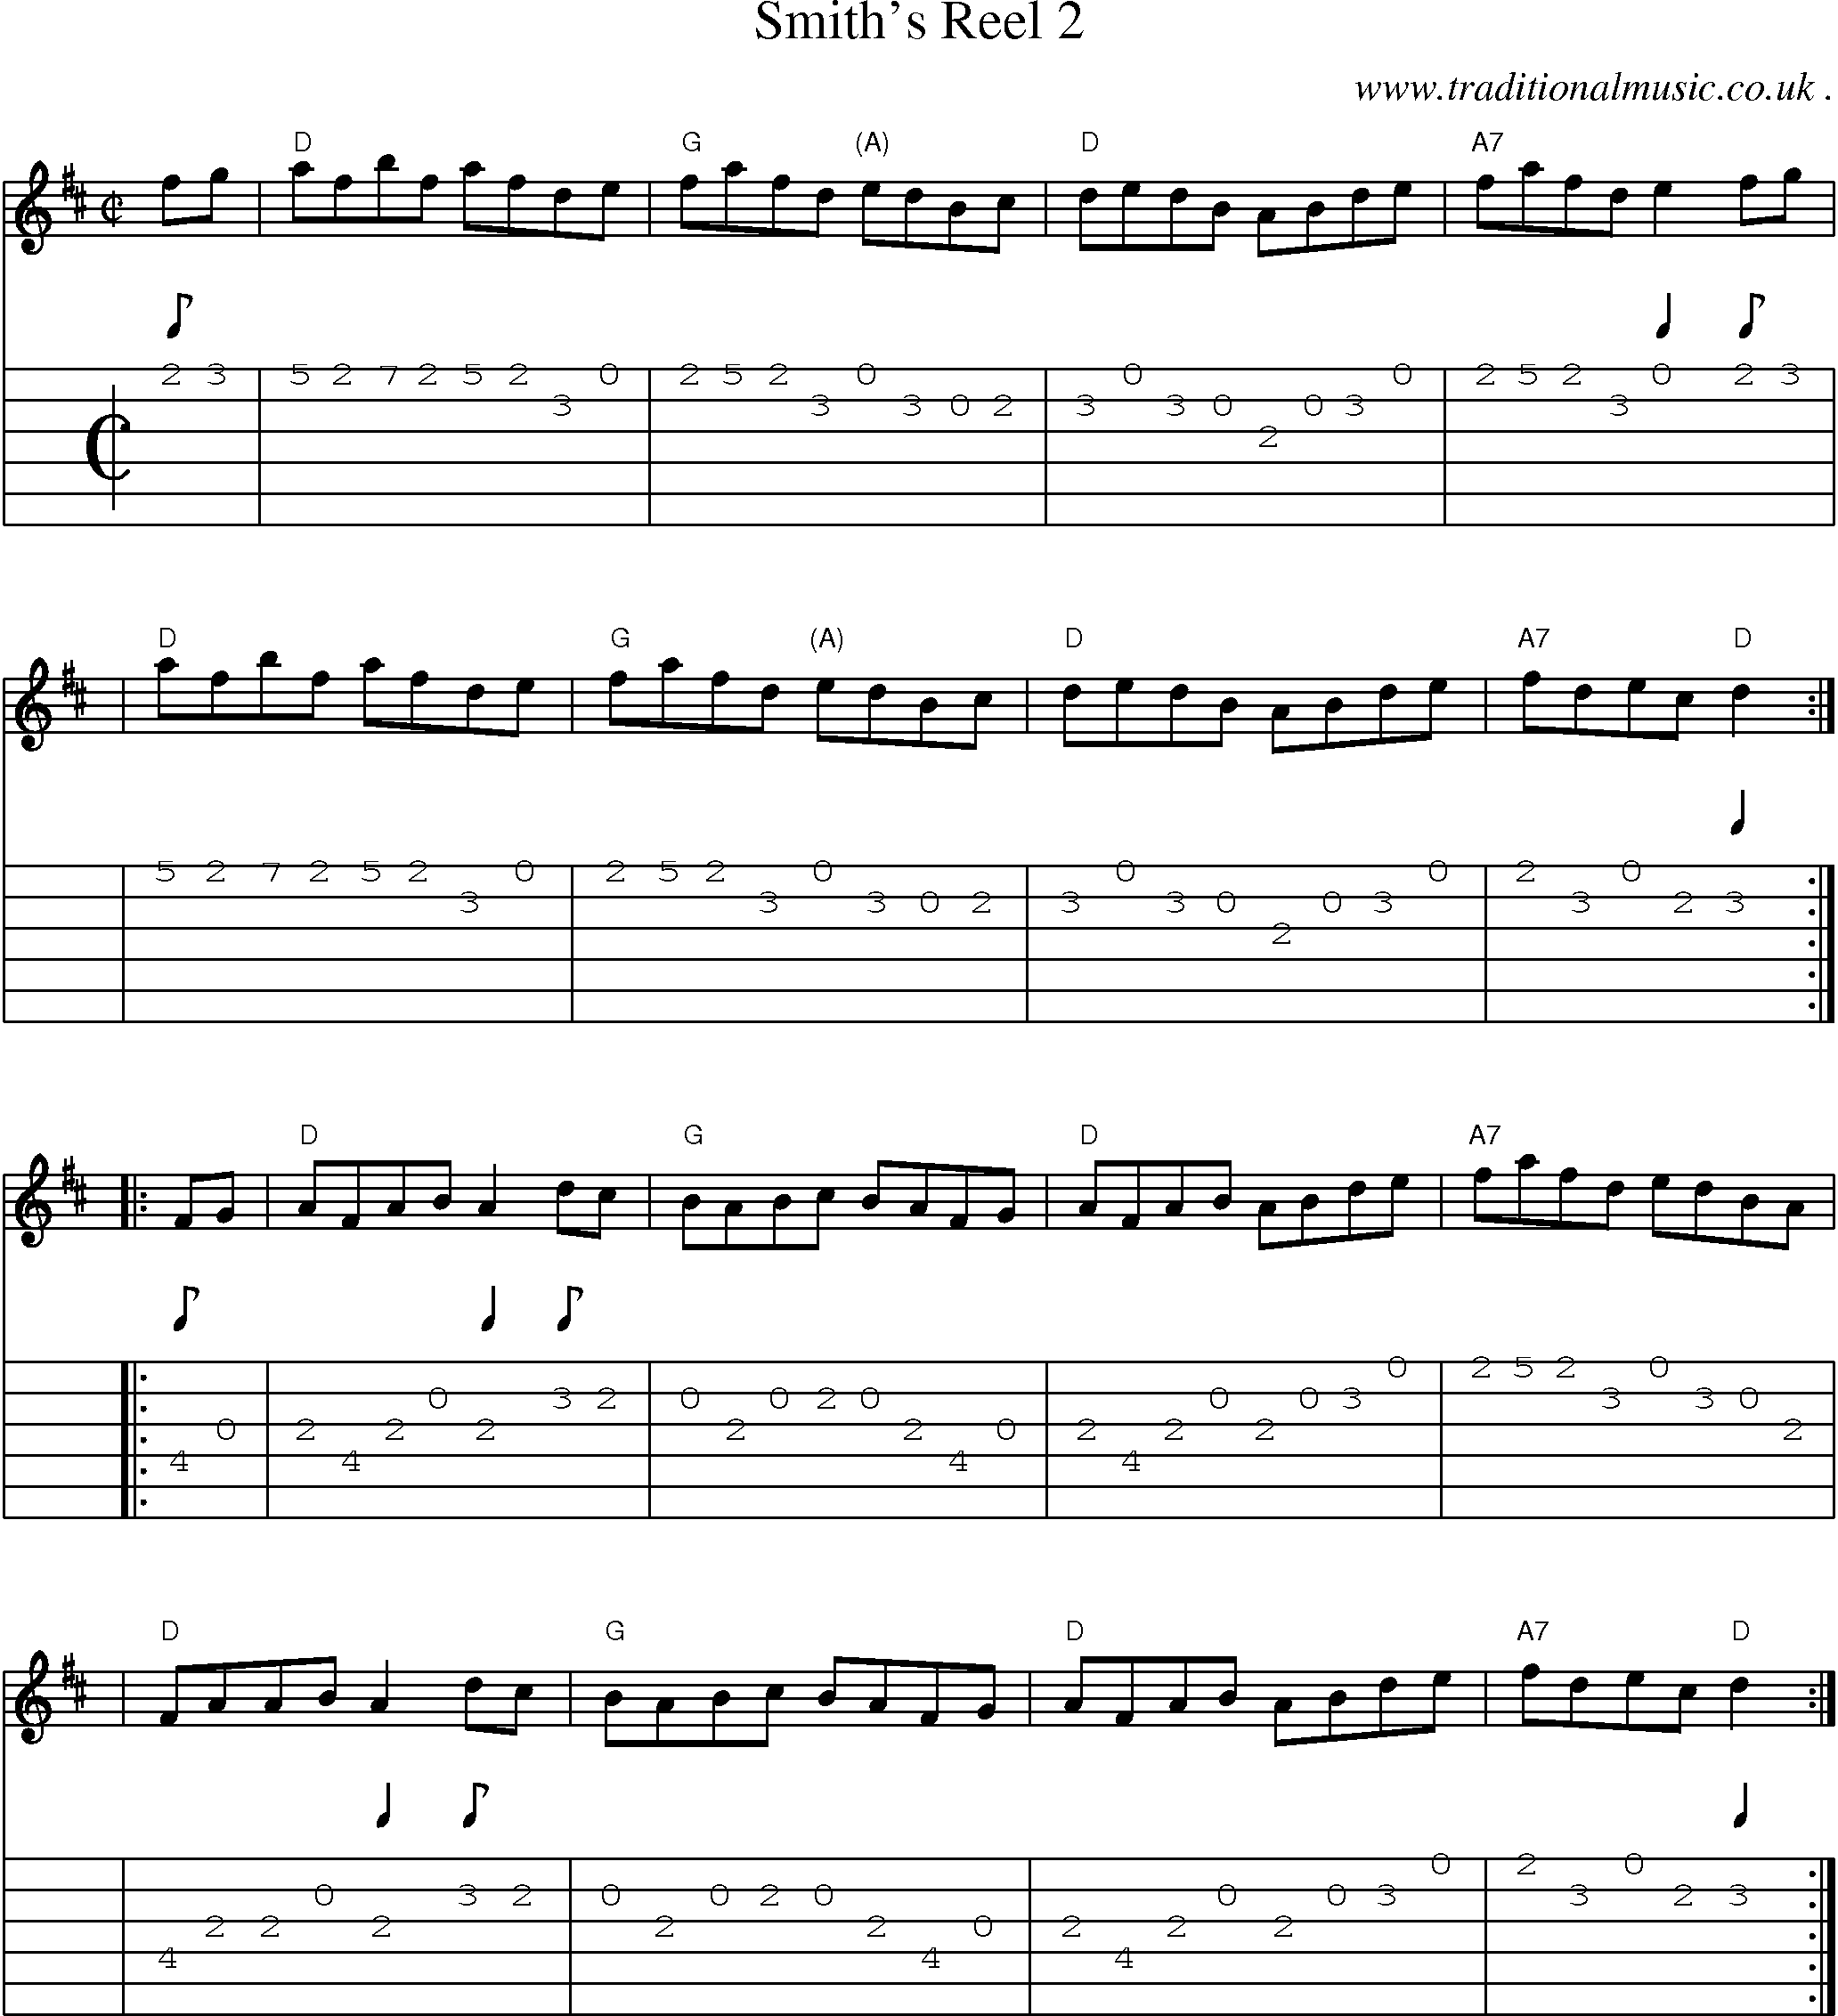 Music Score and Guitar Tabs for Smiths Reel 2